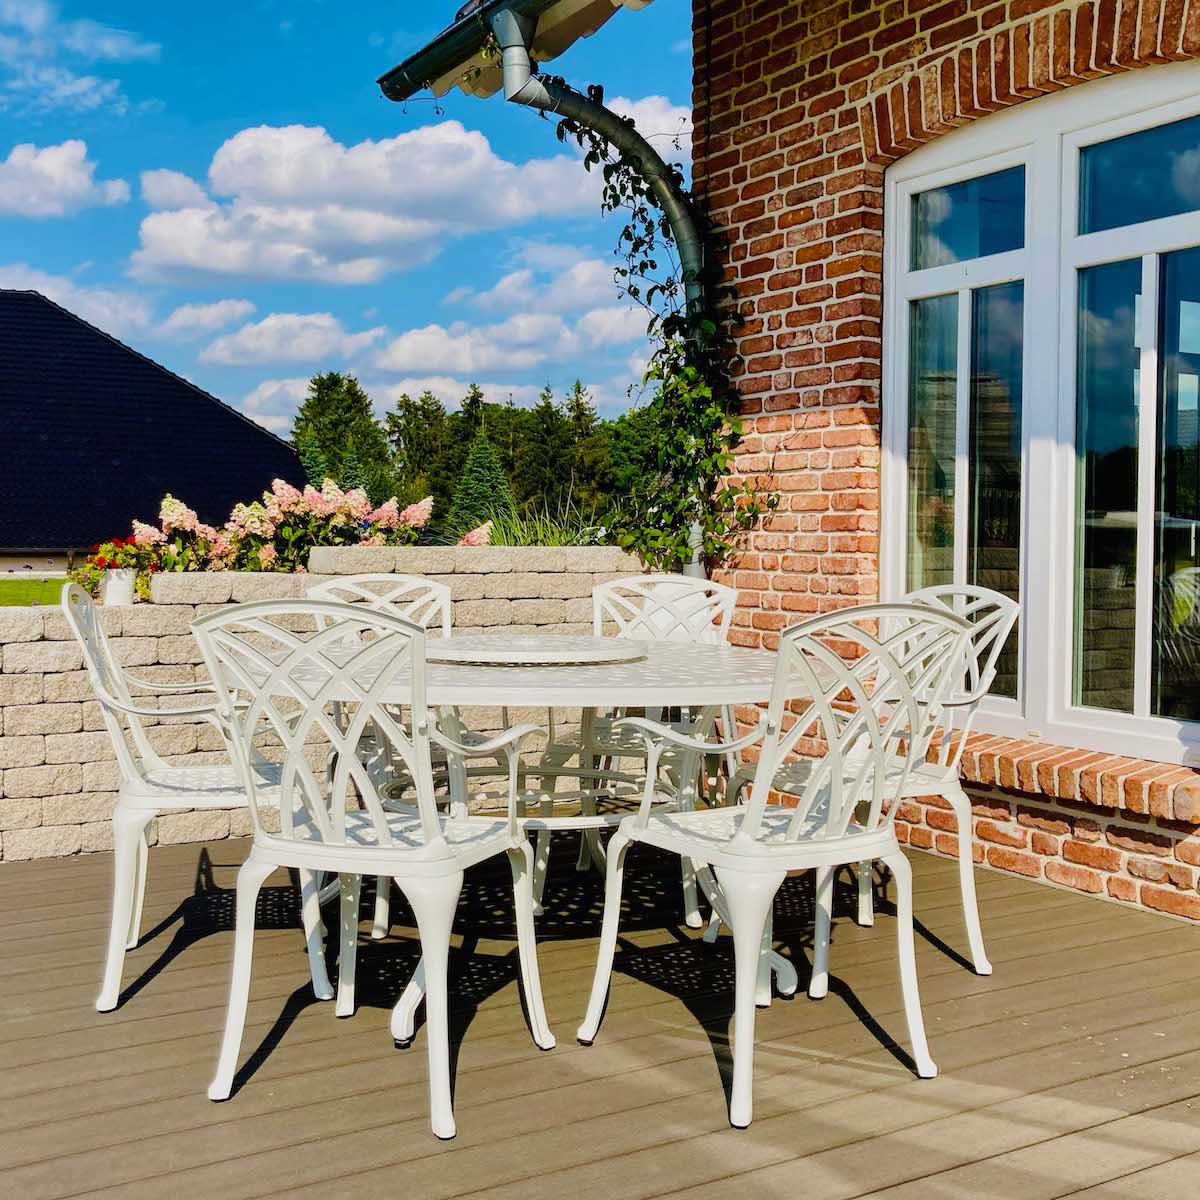 How do you find the best price or promo deal on a new garden table set?